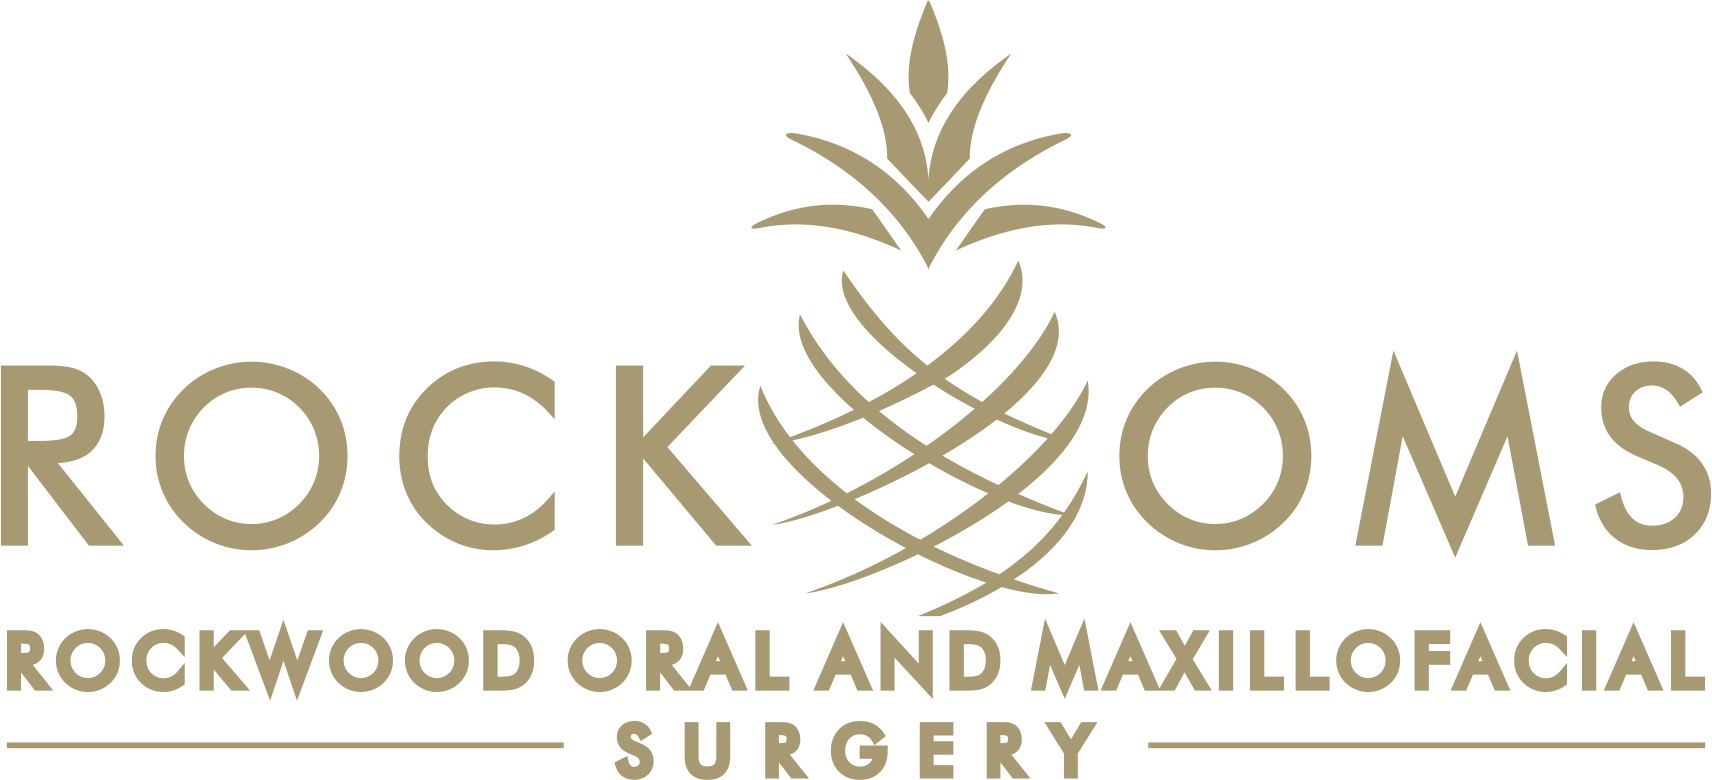 Link to Rockwood Oral and Maxillofacial Surgery home page